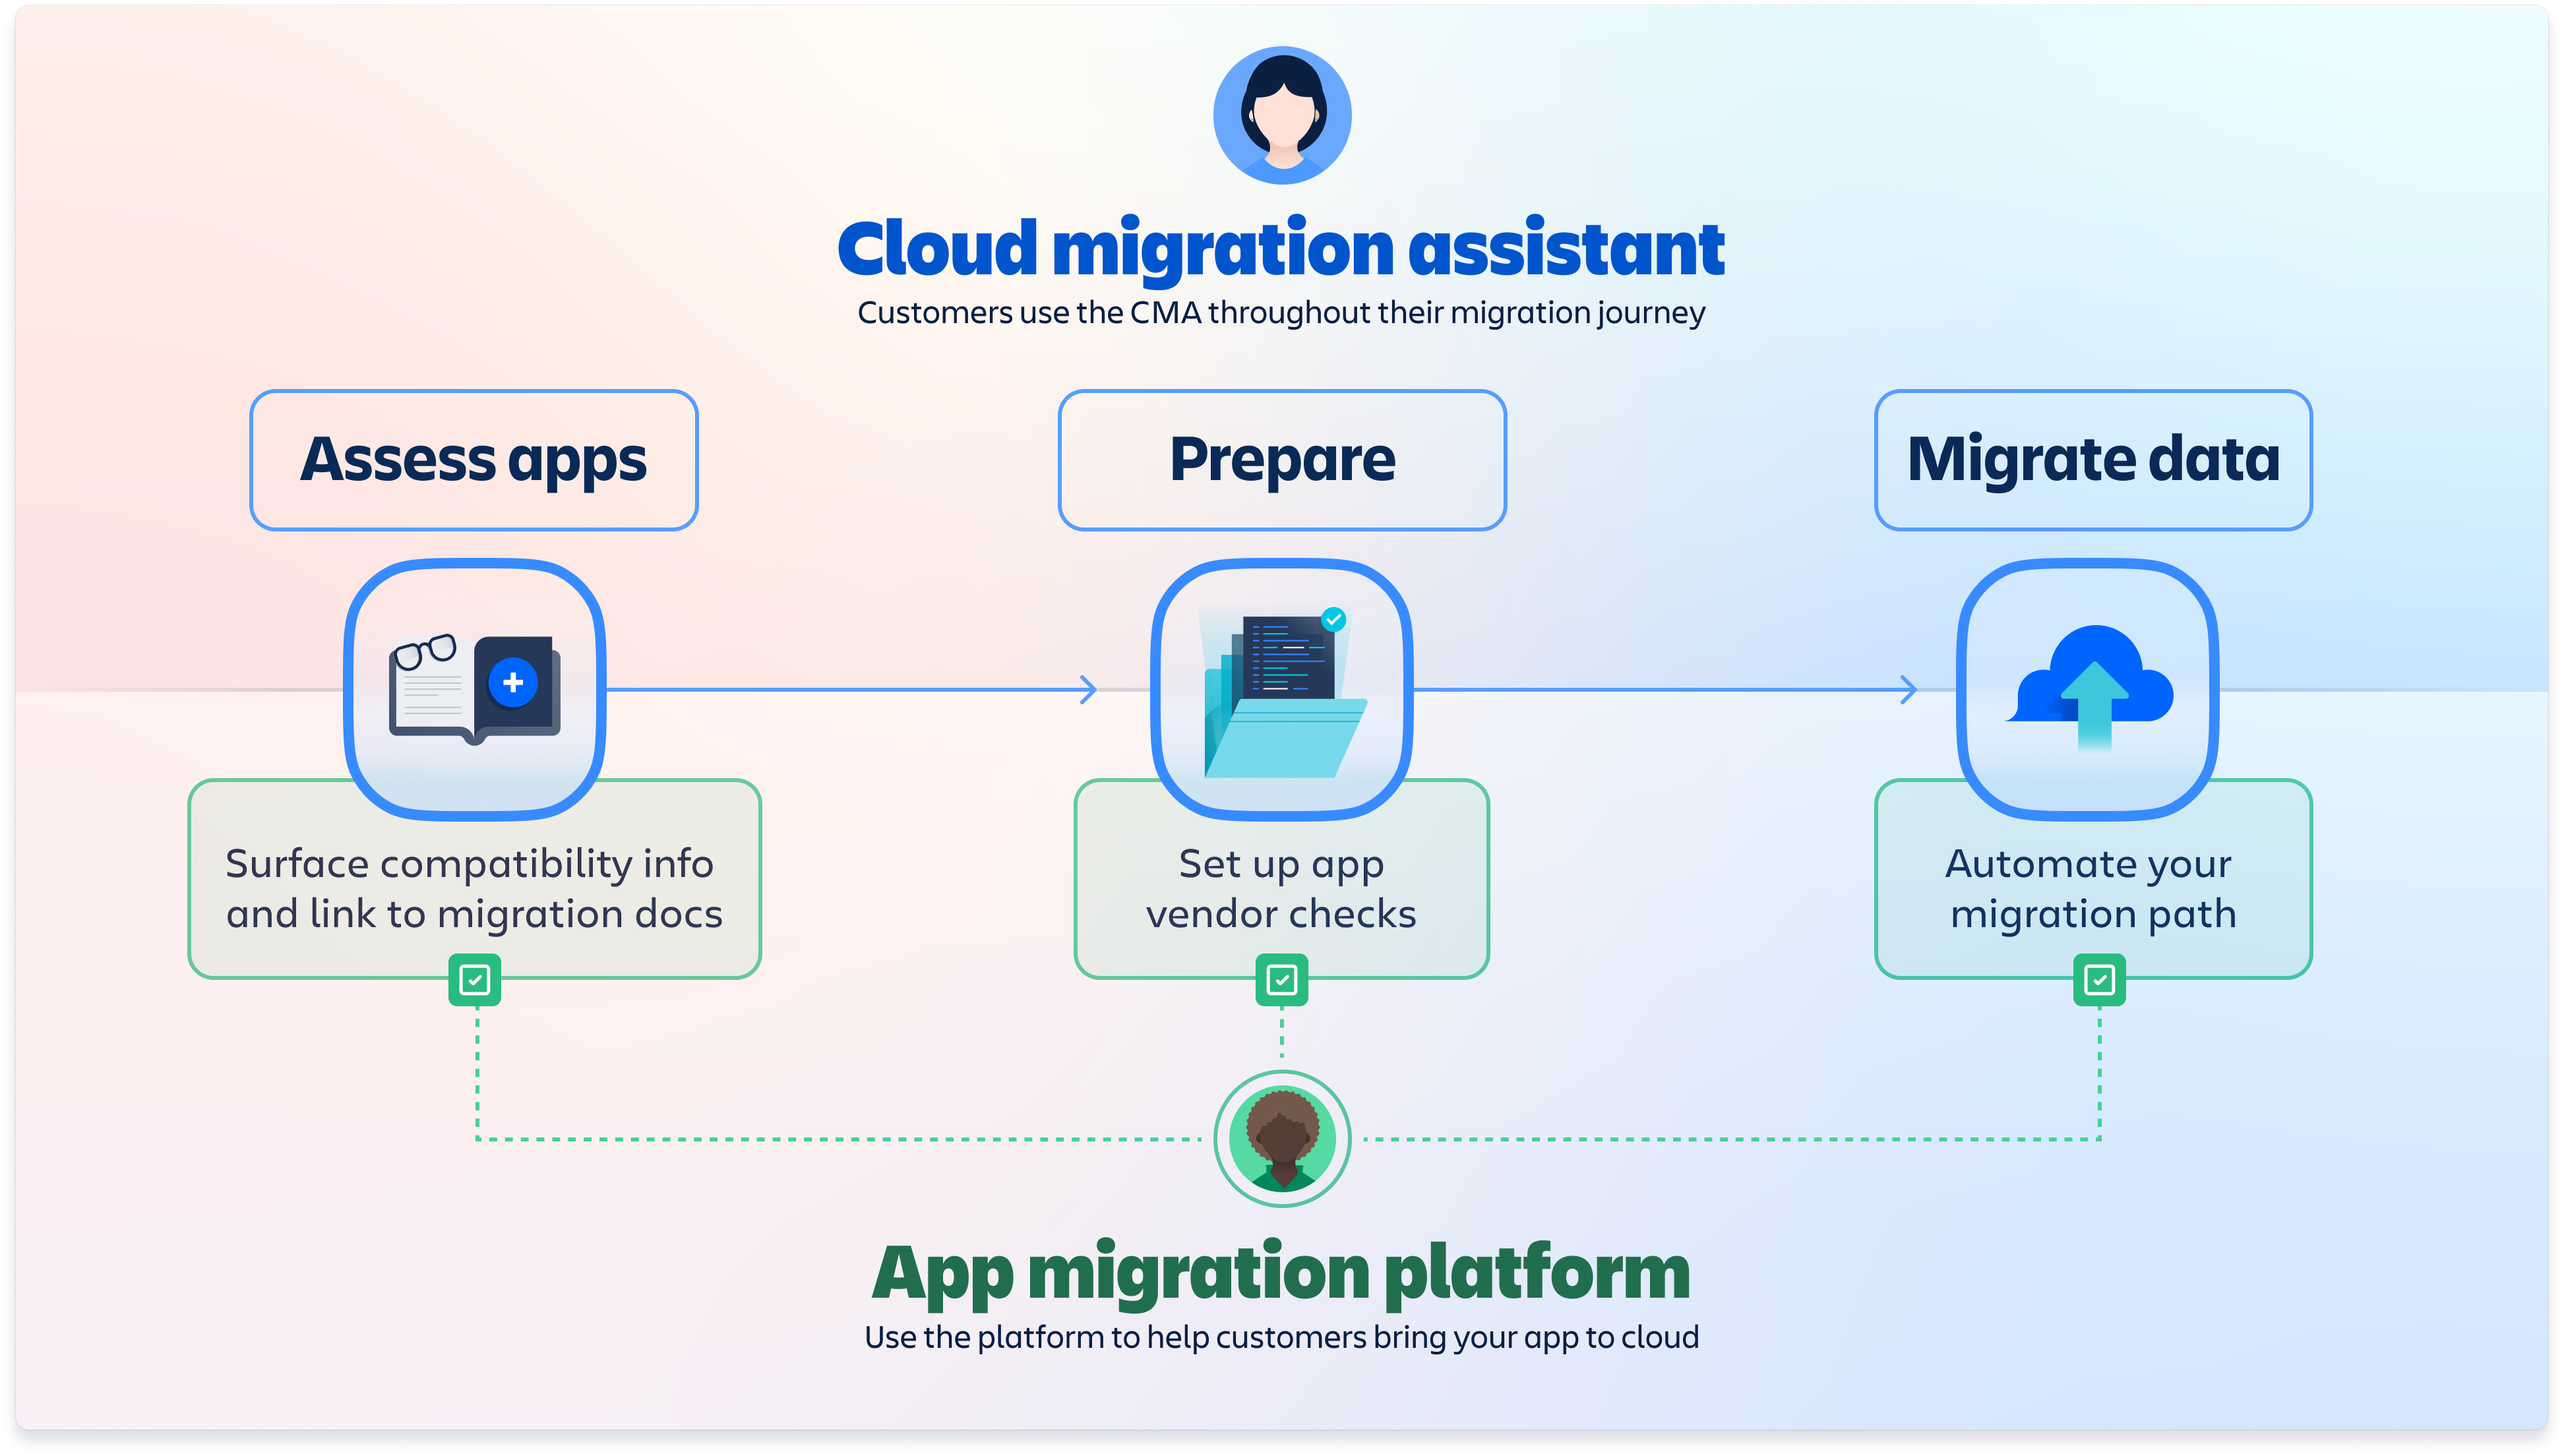 Diagram showing how app builders can use the app migration platform to help customers migrate their app data to cloud.